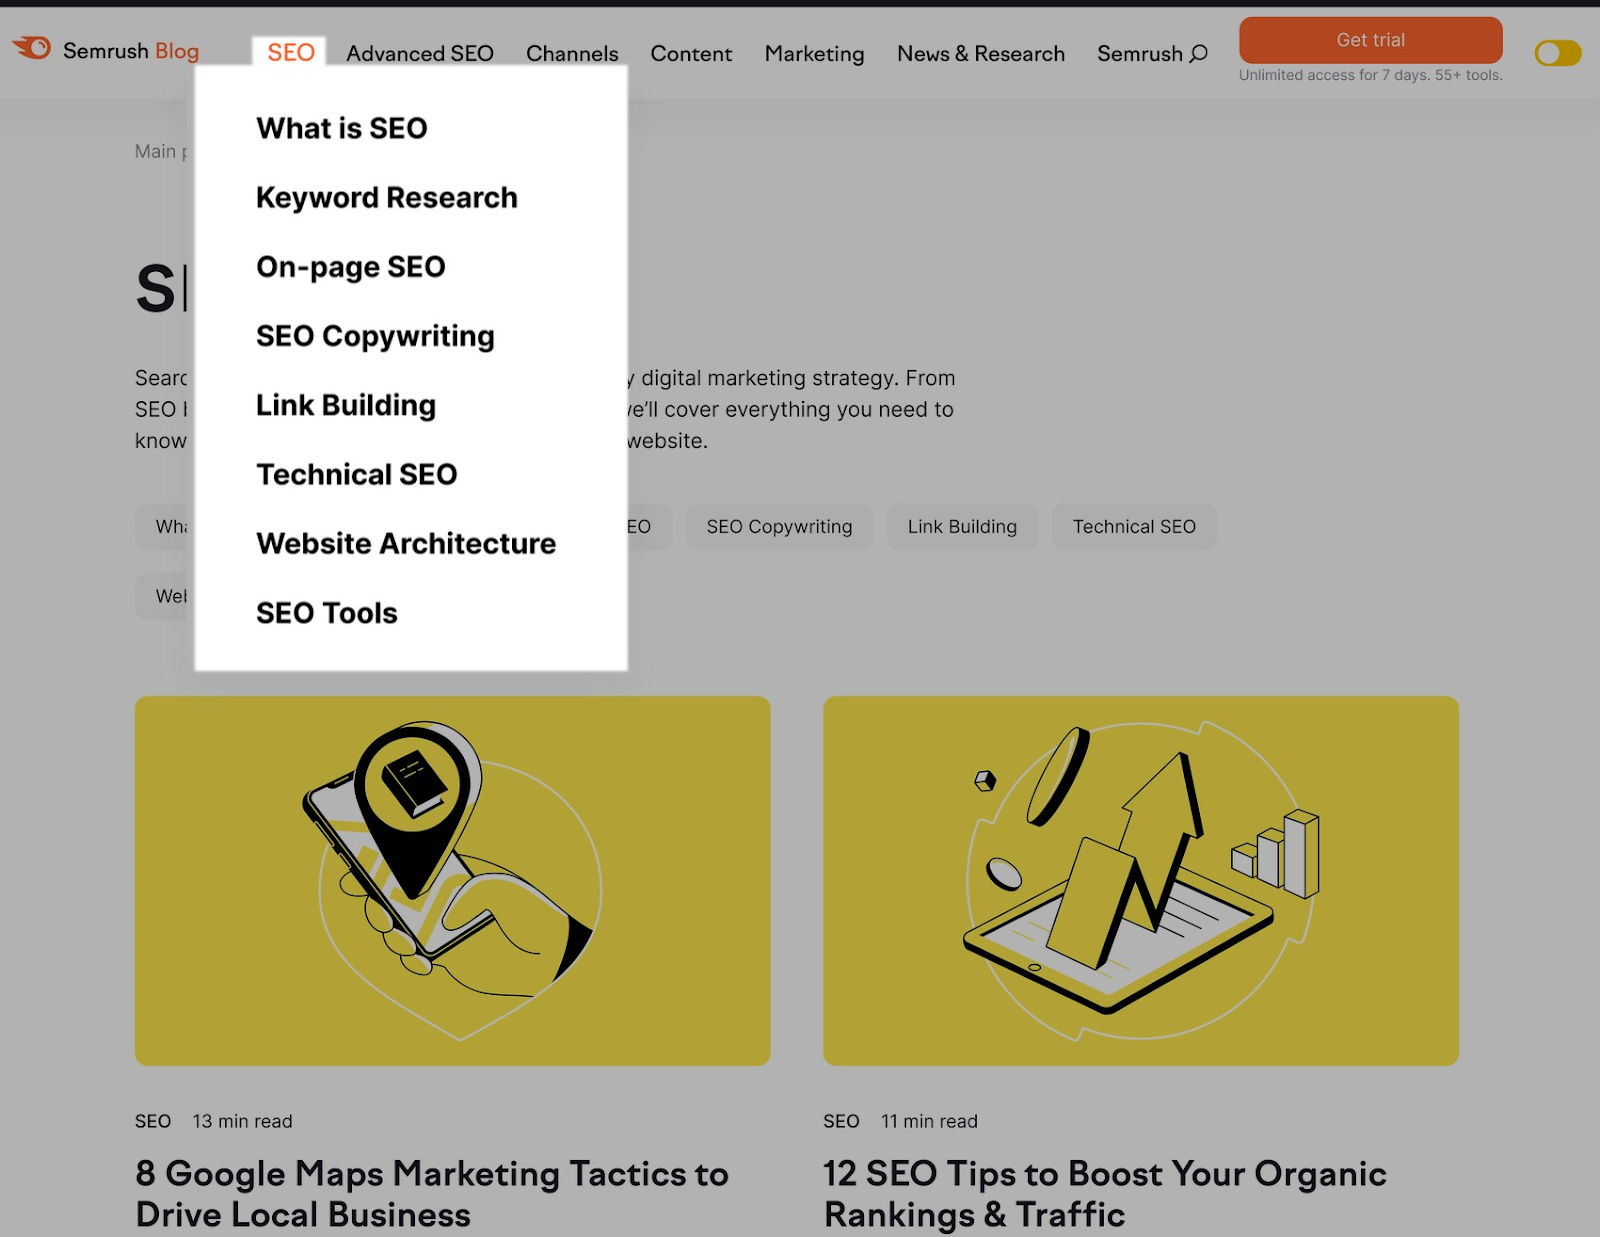 Semrush Blog subcategories for "SEO" category in the navigation menu